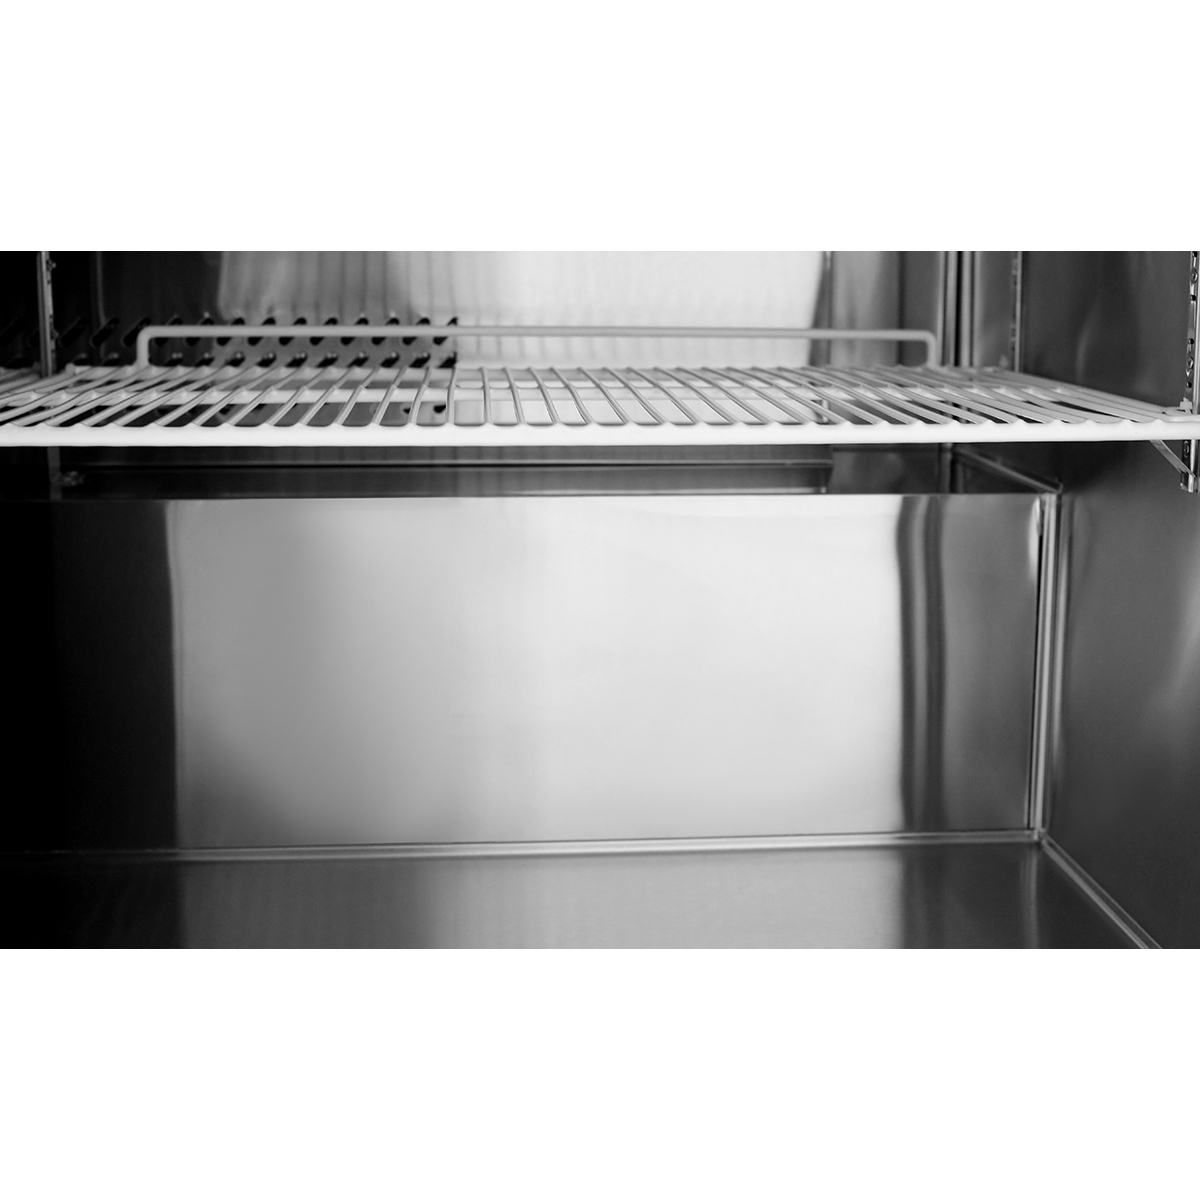 Atosa MGF8410GR Worktop Refrigerator, Two Section, 60-1/5"W, 17.2 cu. ft. image 2